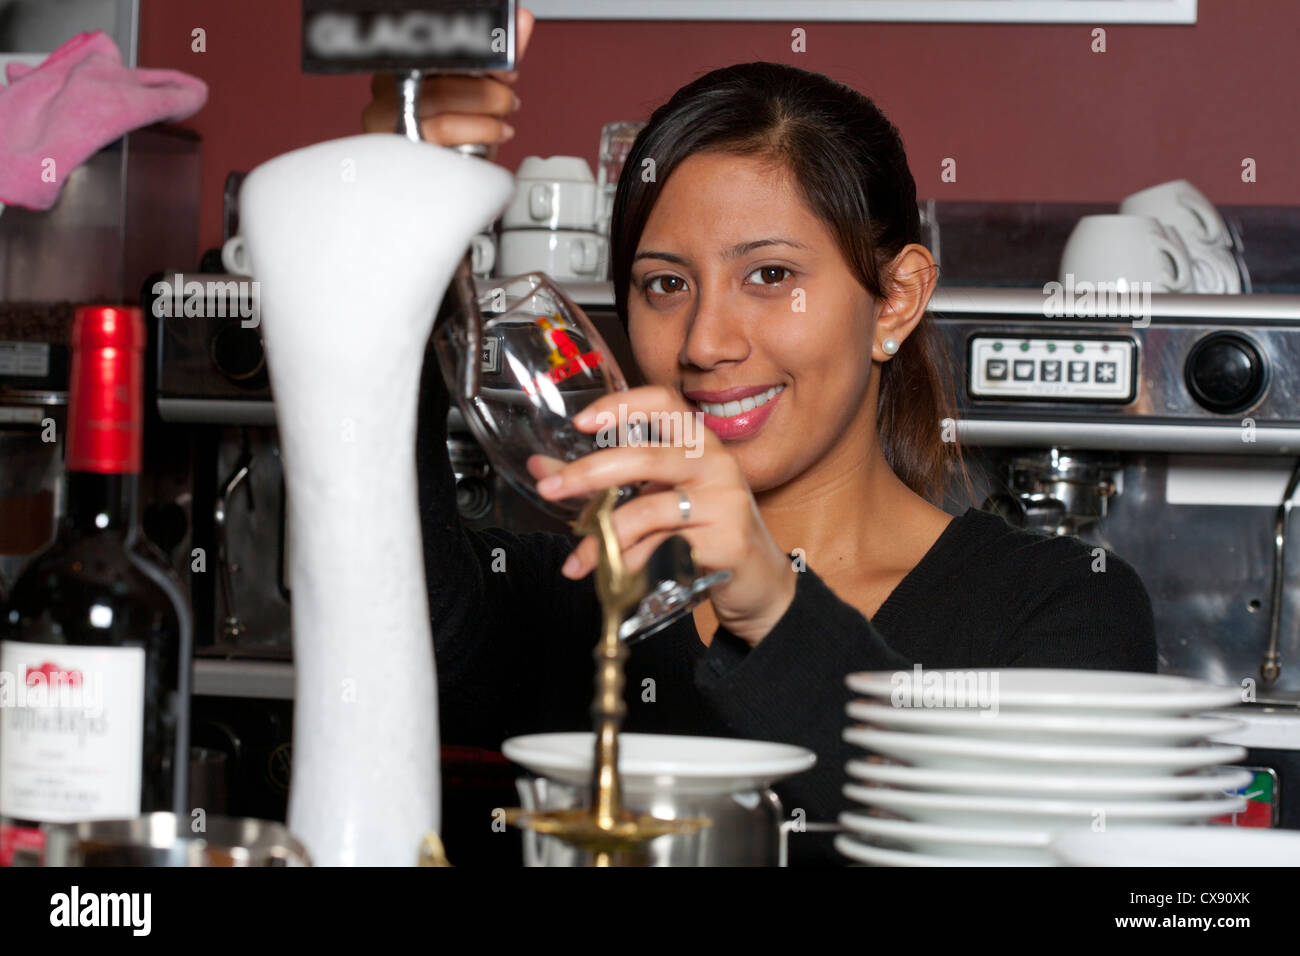 waitress pours draft beer, Café, Southern Spain Stock Photo